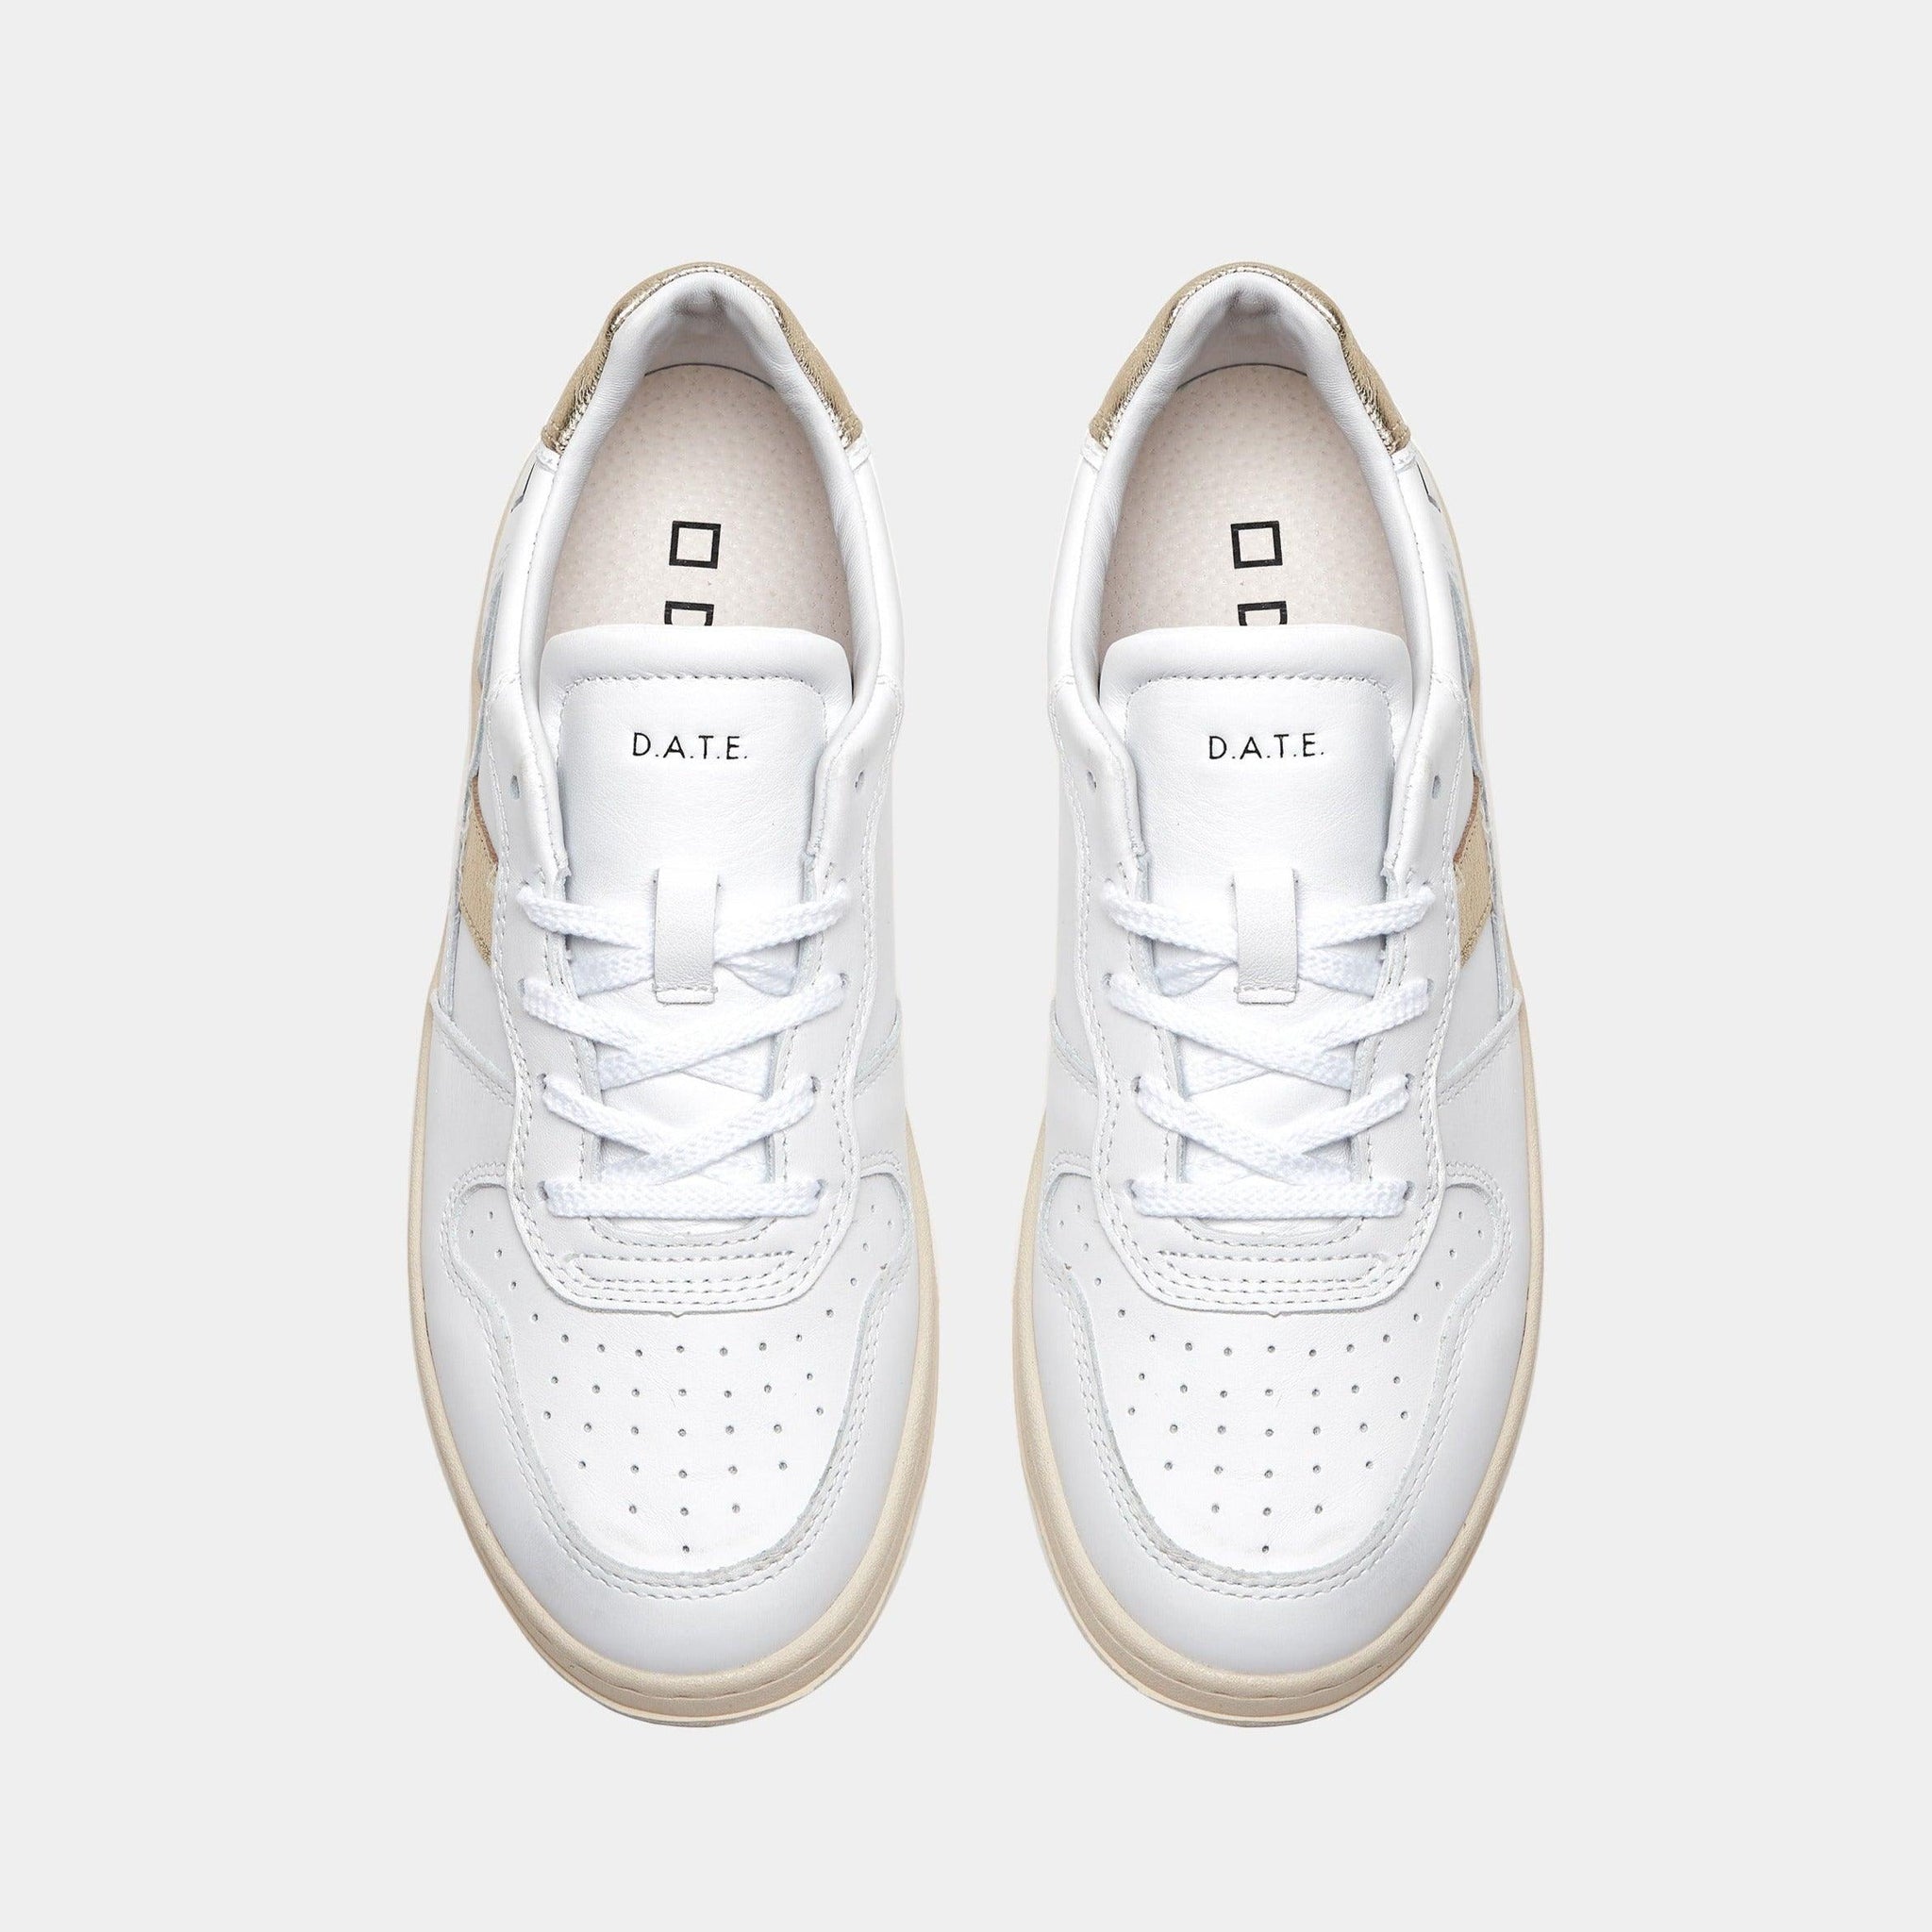 D.A.T.E Court 2.0 White & Gold trainer - MADE THE EDIT